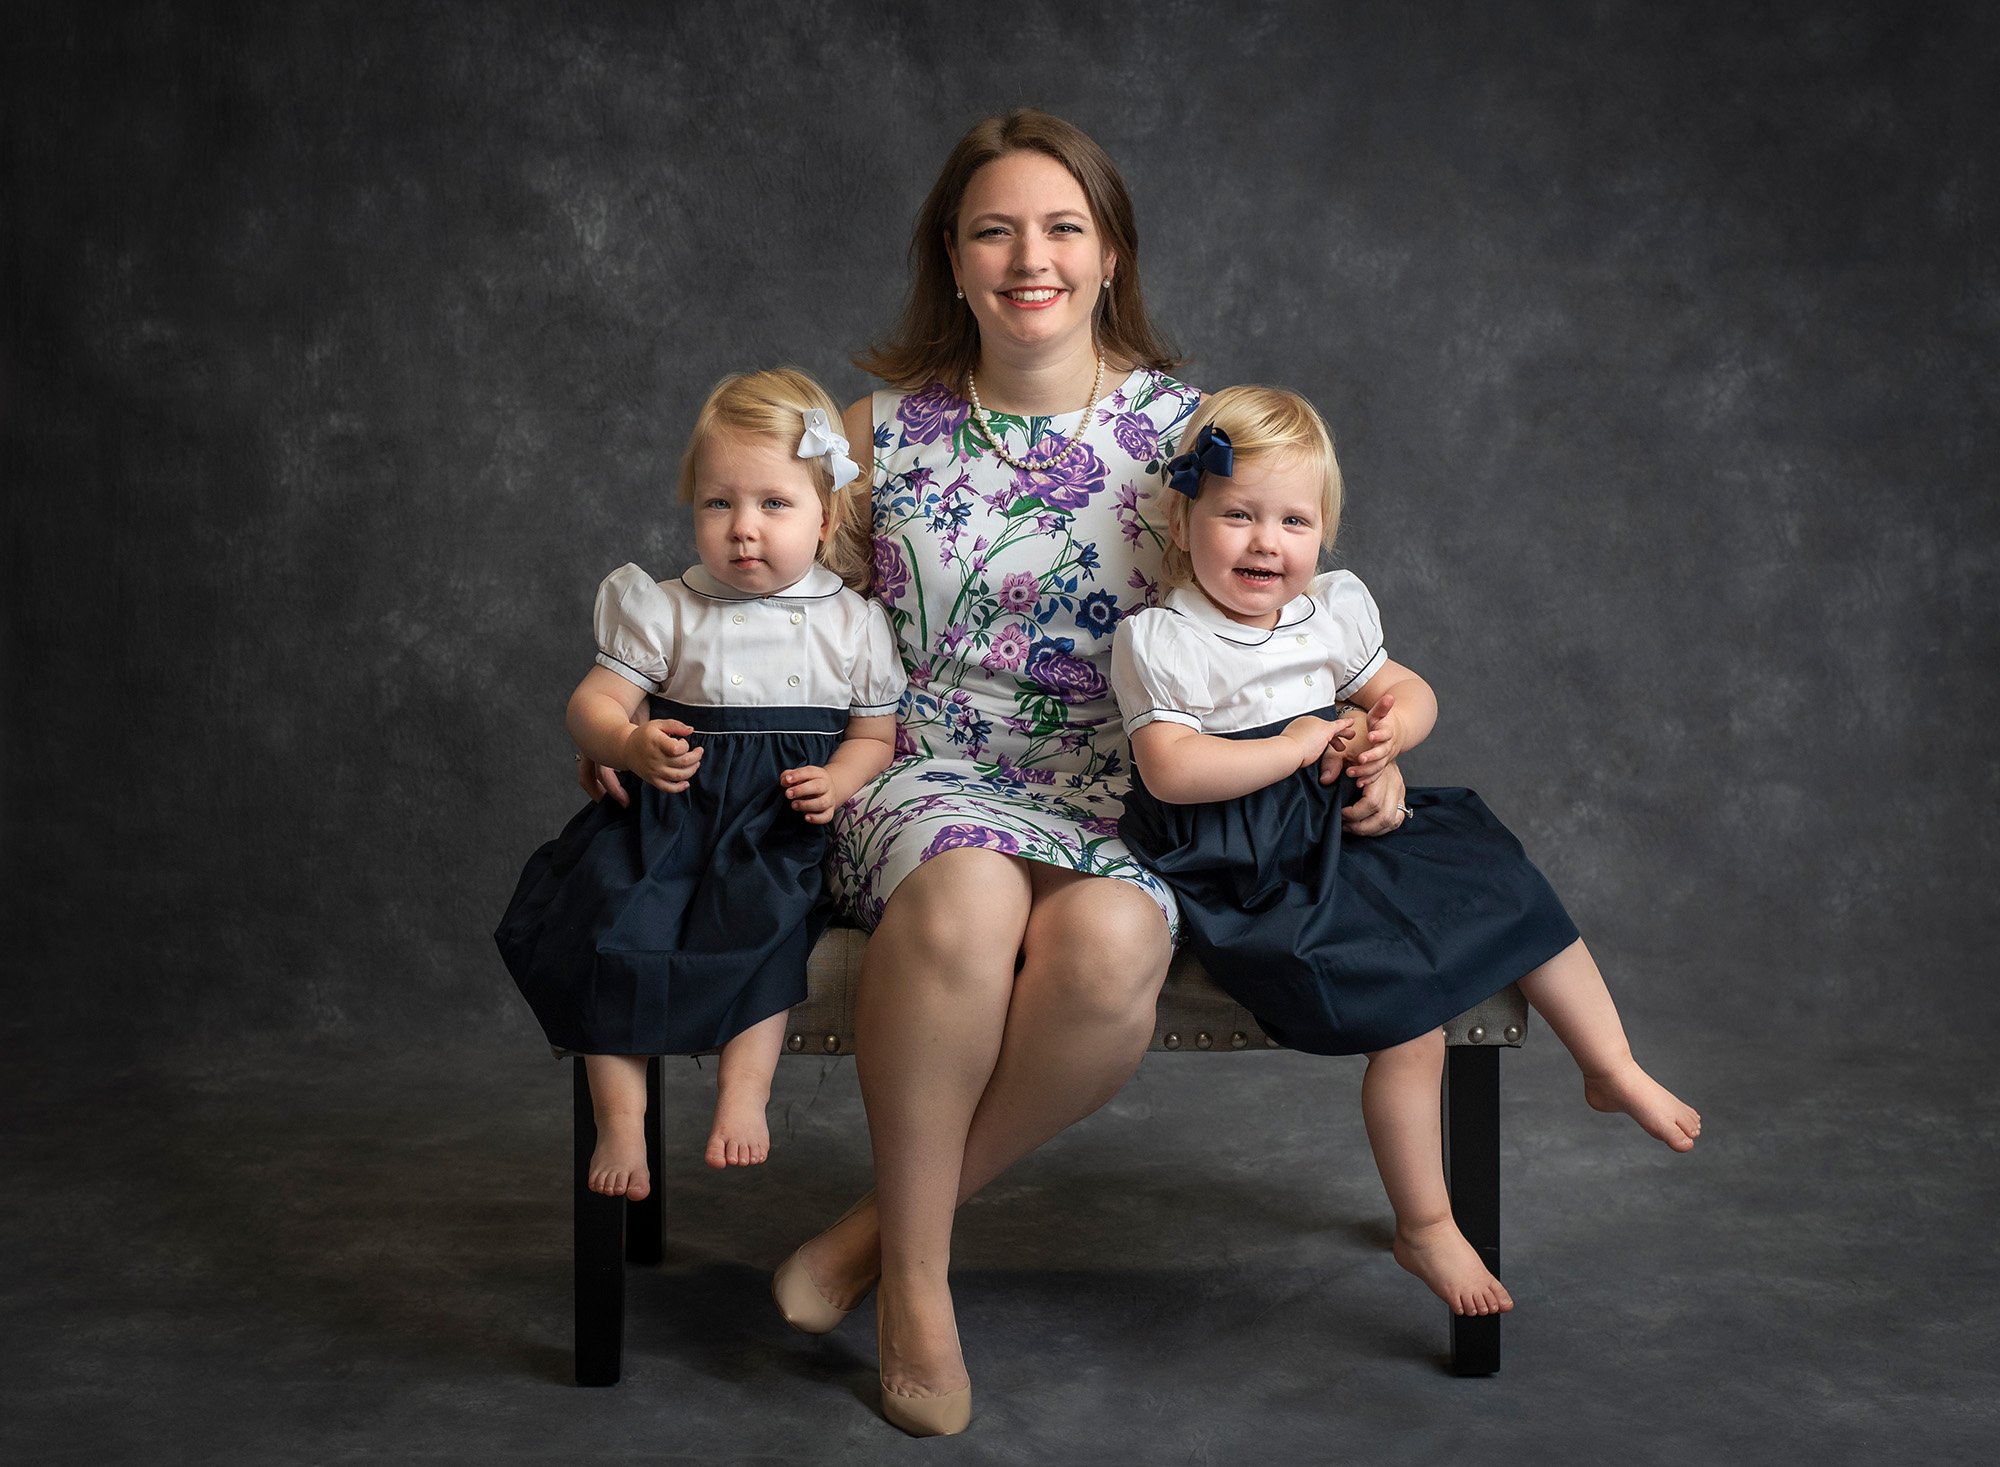 identical twin girls posing with their mother